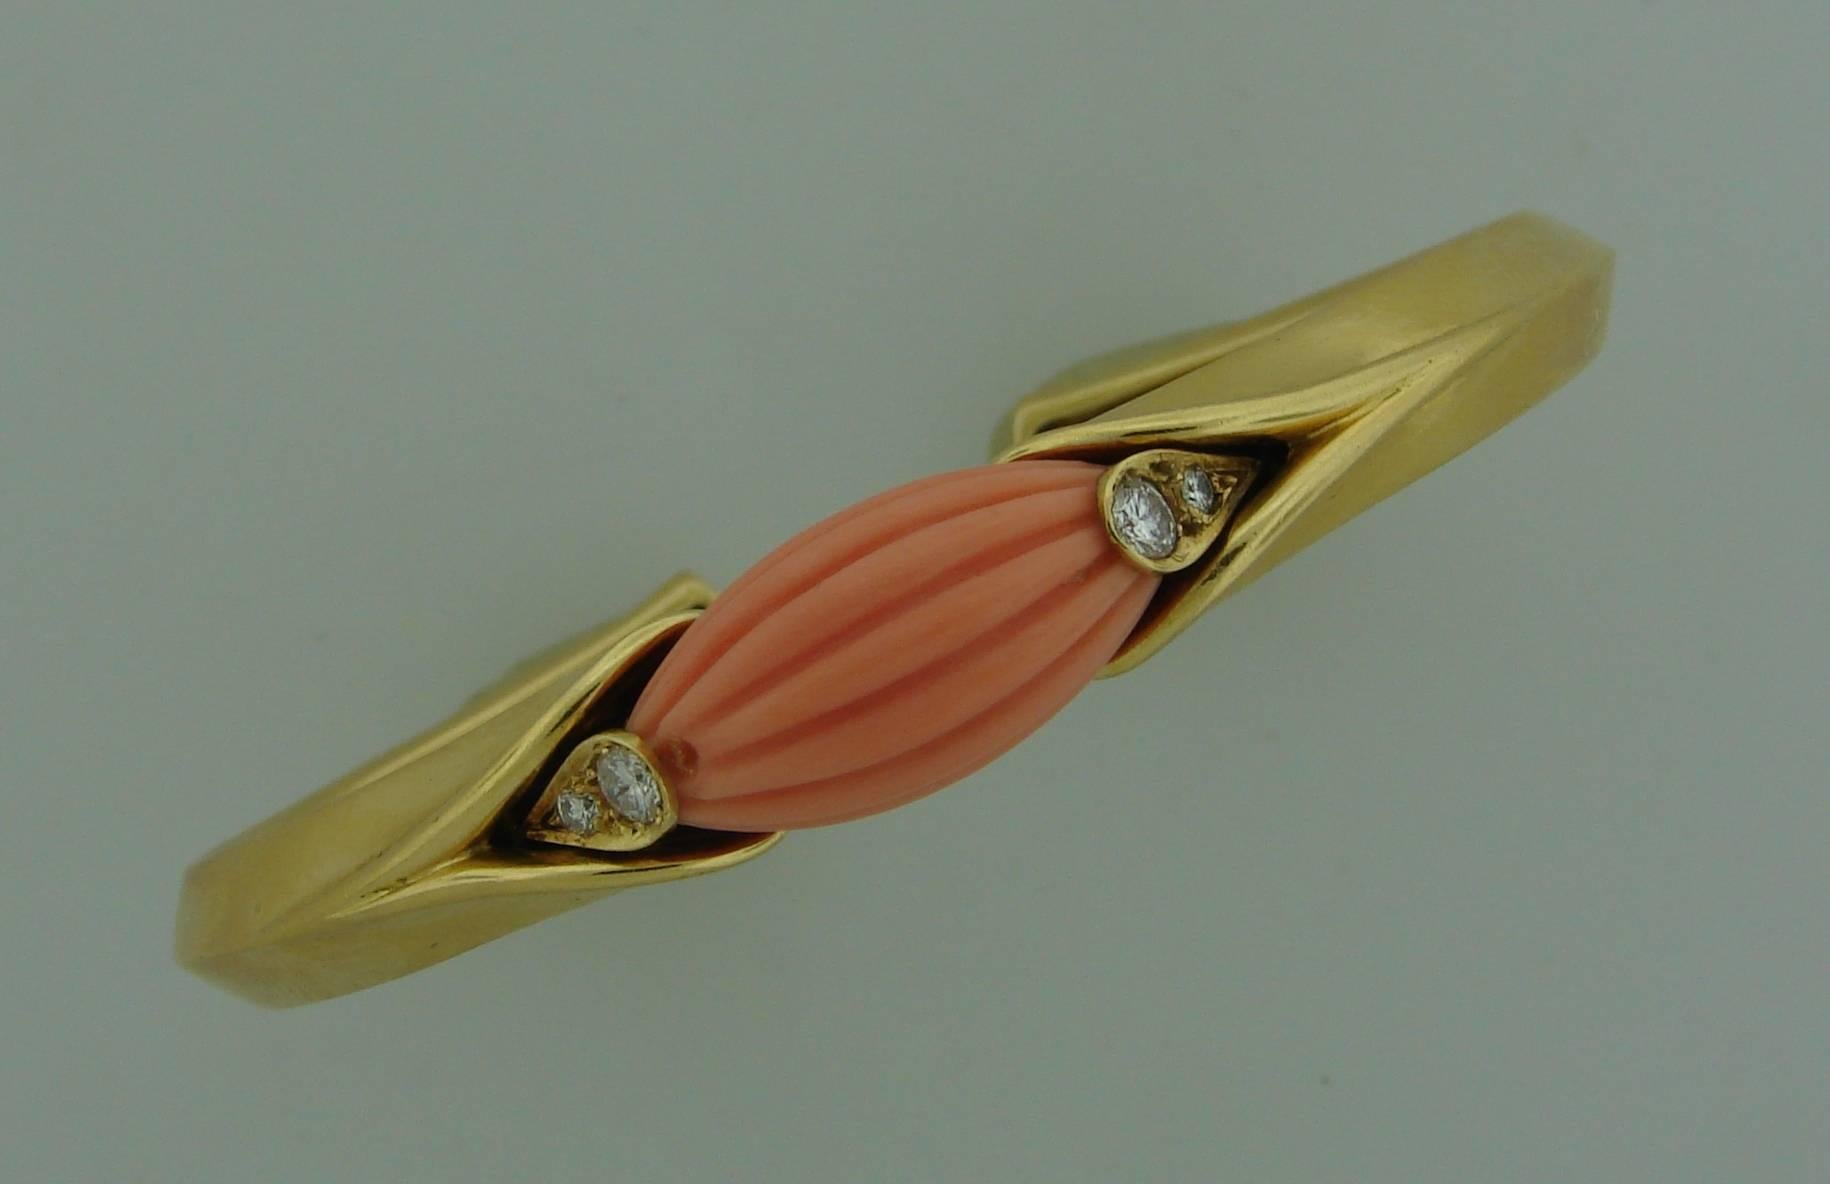 Elegant and classy bangle created by Van Cleef & Arpels in France in the 1971. Features a carved coral set in 18k yellow gold and accented with round brilliant cut diamonds. 
The bracelet fits up to 6.5